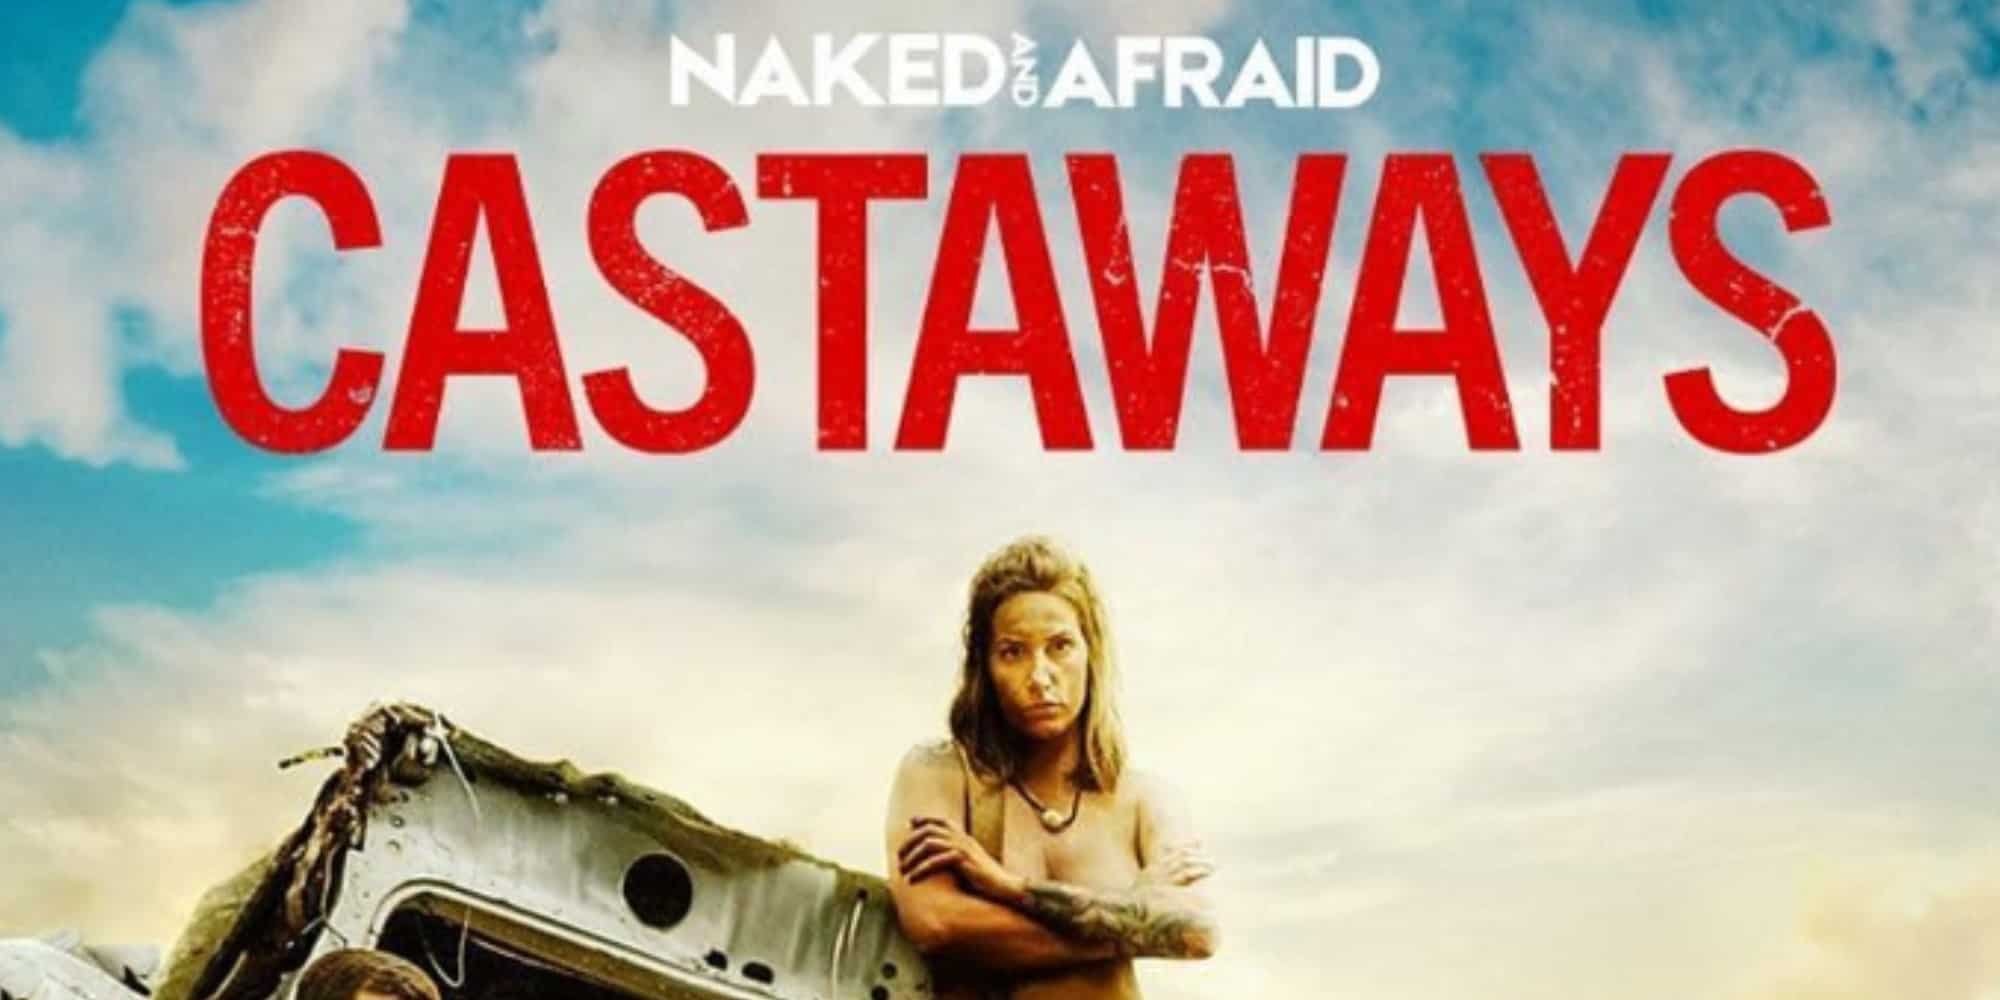 How To Watch Naked And Afraid Castaways Episodes? Streaming Guide & Schedule